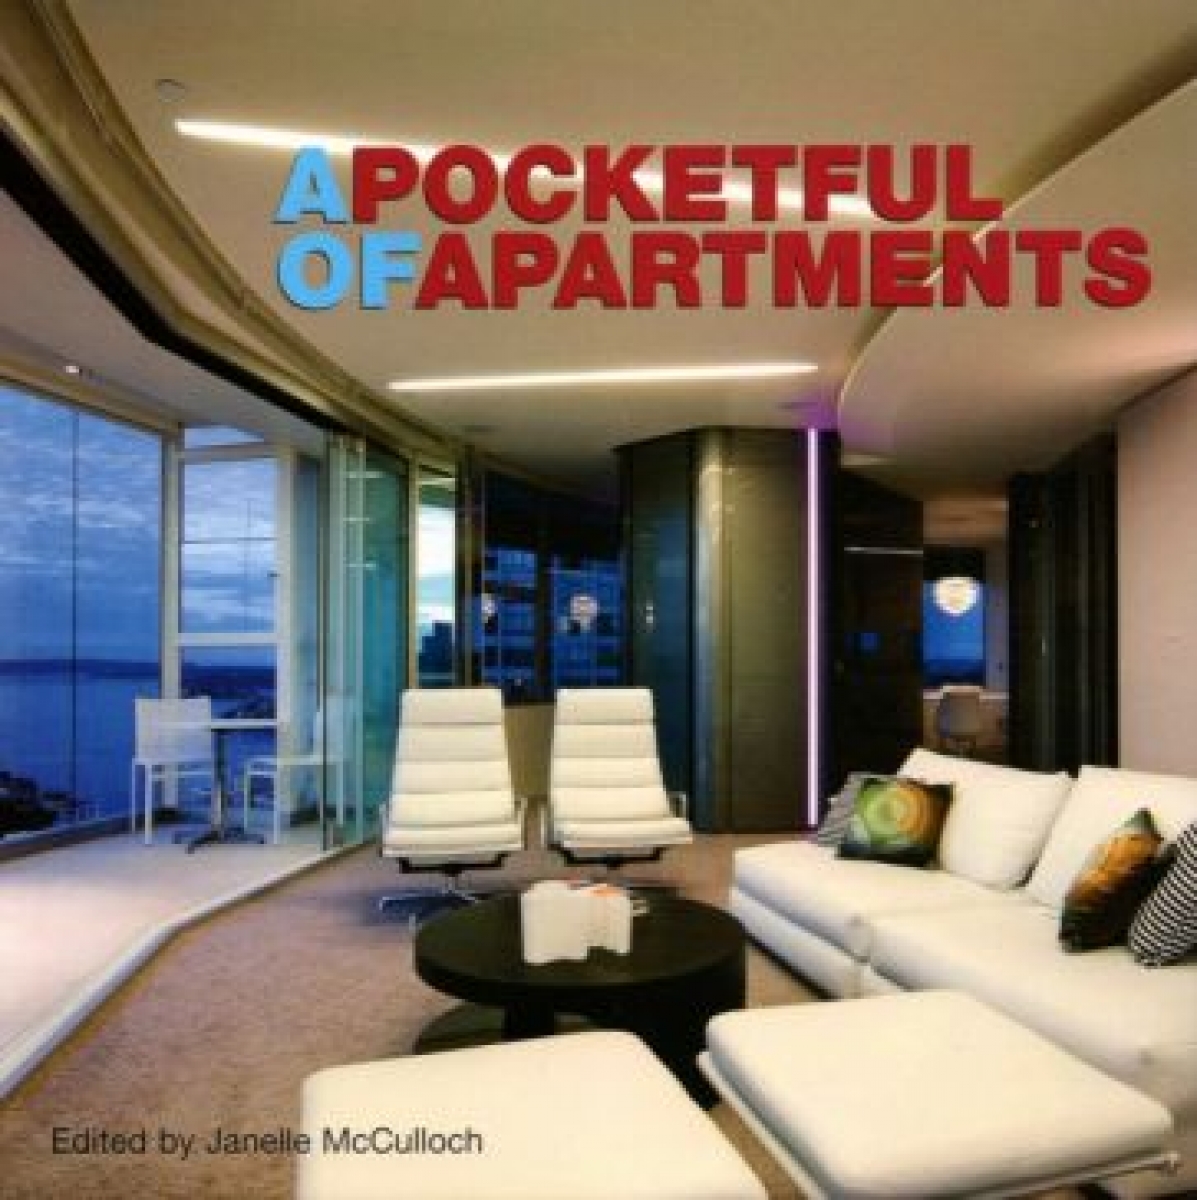 Janelle M. A Pocketful of Apartments 